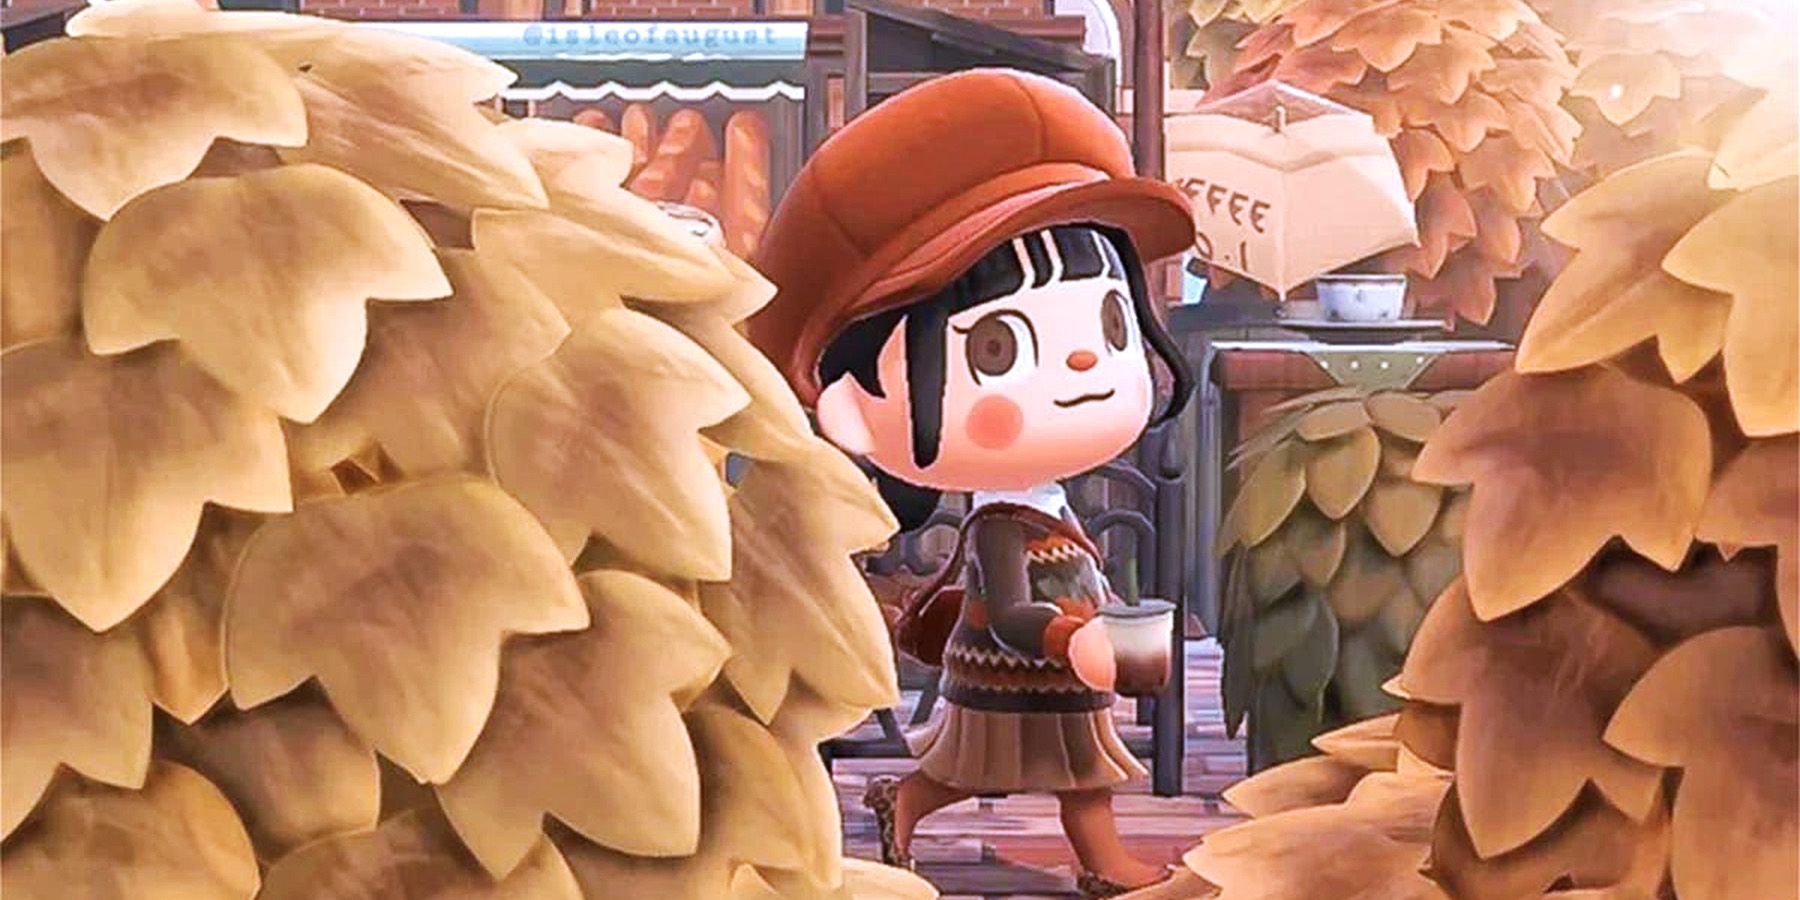 This Animal Crossing Farmers Market is Perfect For Rural Islands